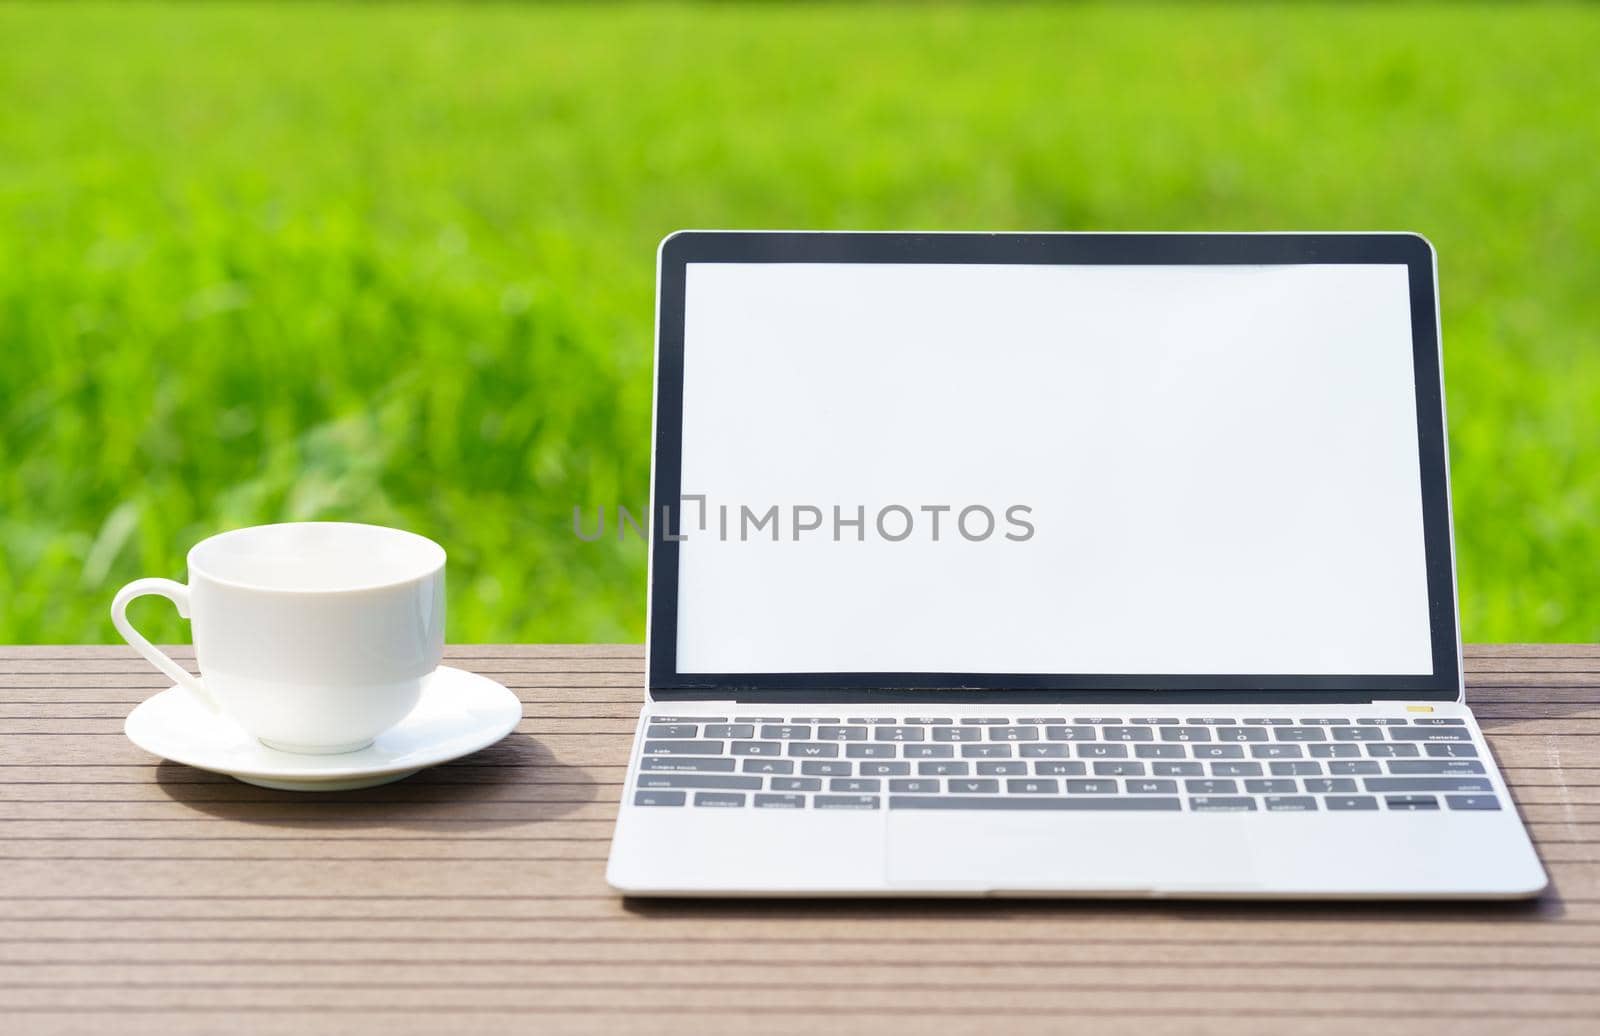 laptop and cofree cup on wood table agent green grass field in countryside